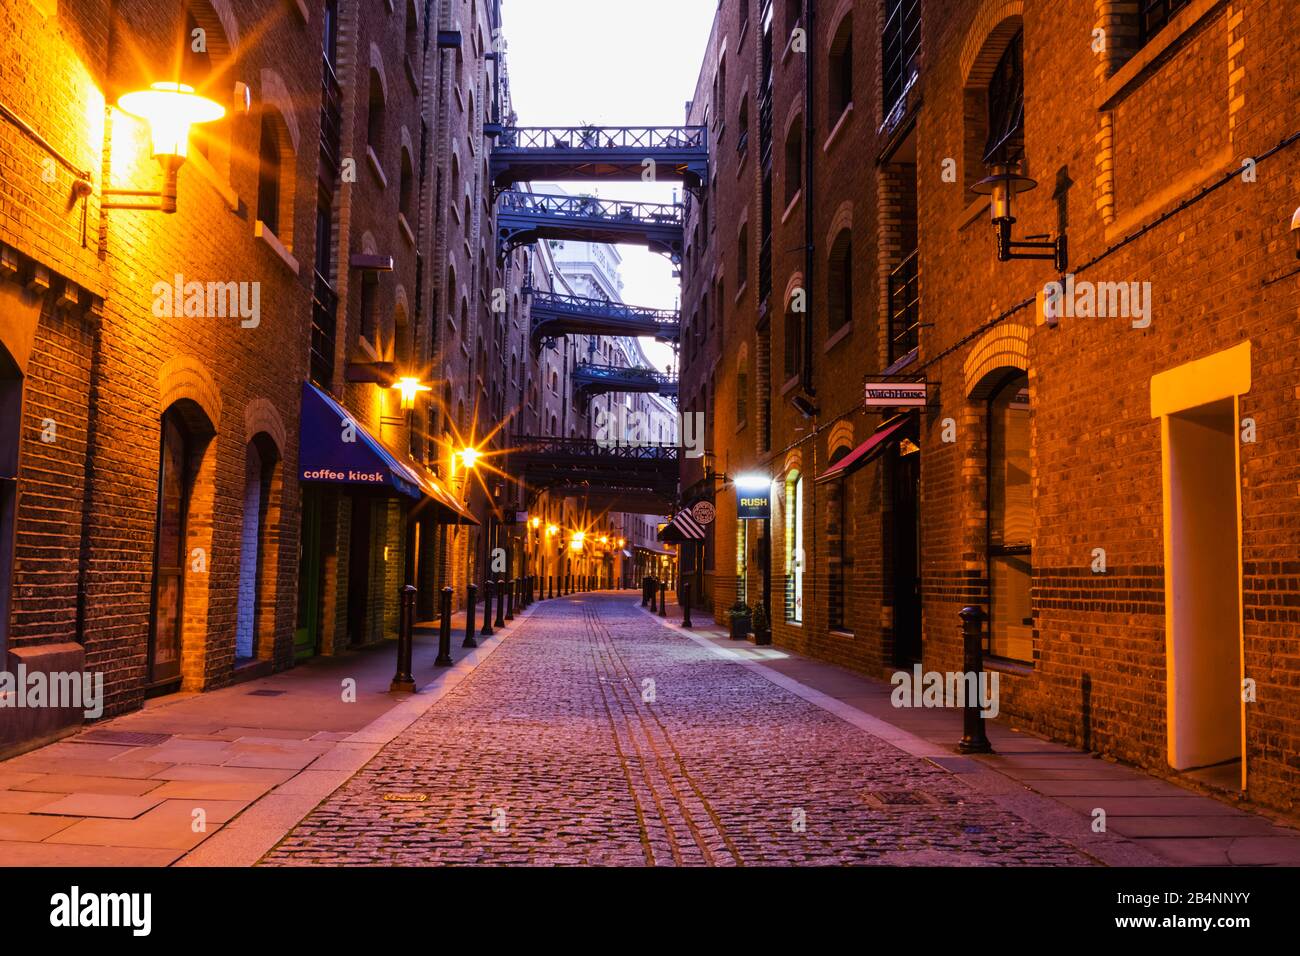 England, London, Southwark, Butlers Wharf, Shad Thames, Converted Victorian Warehouses and Cobblestone Street Stock Photo